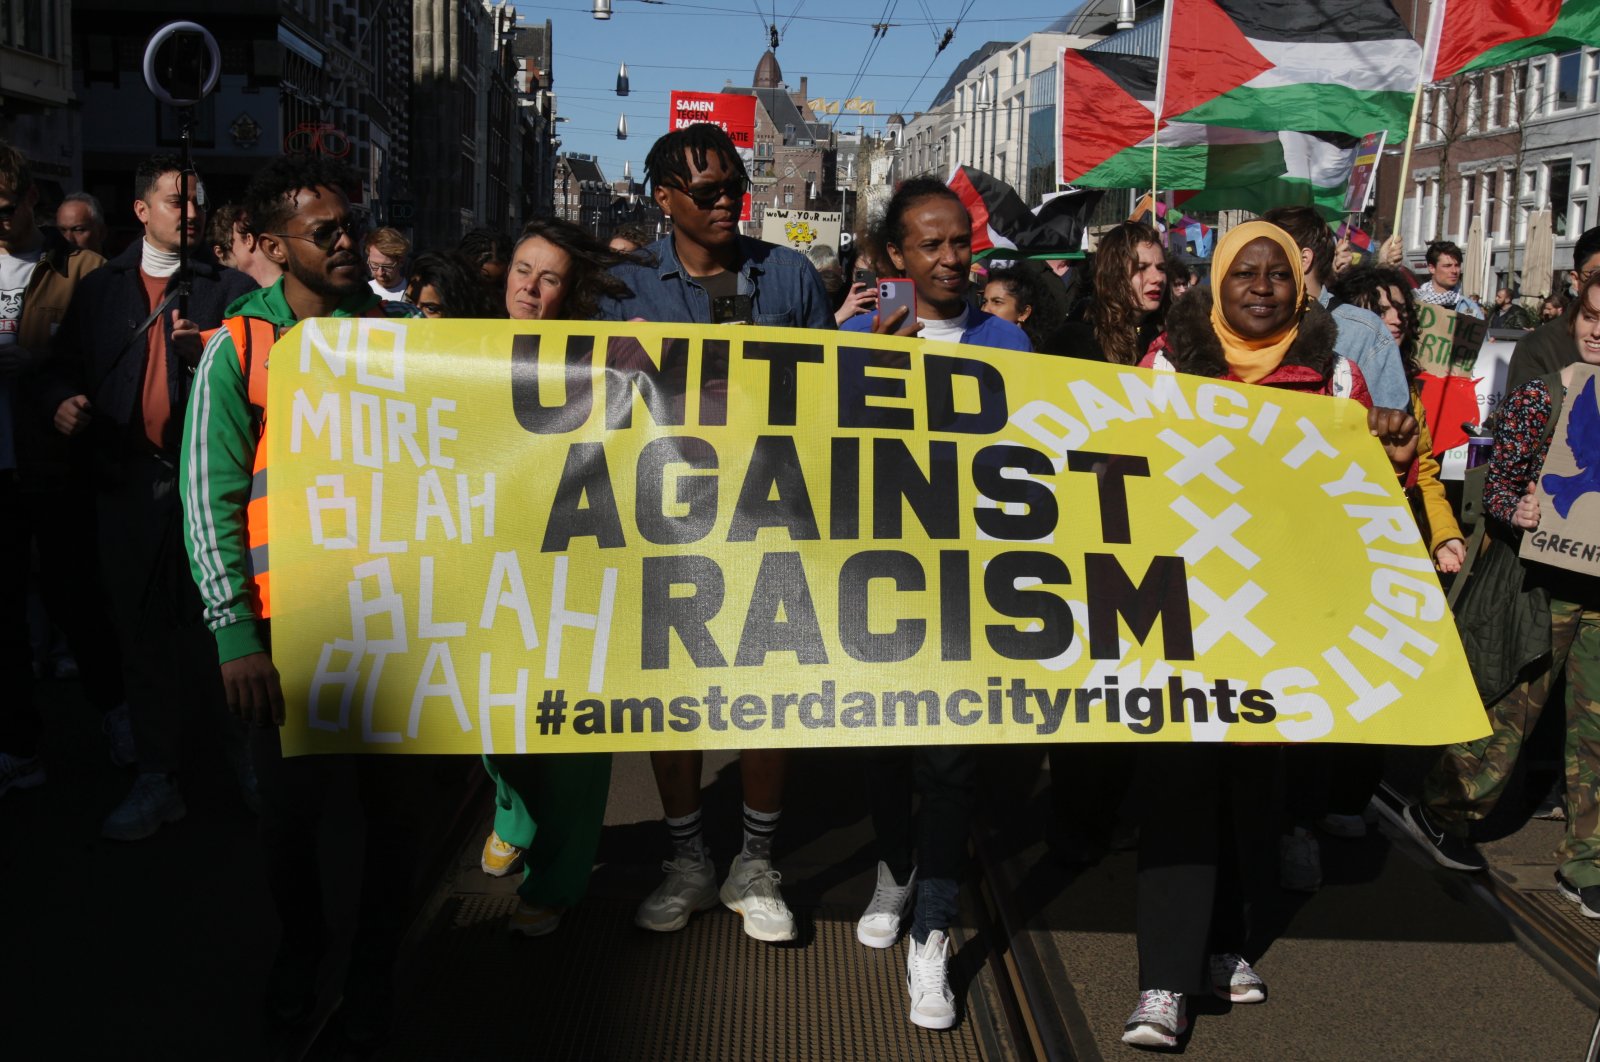 Activists and supporters take part during the Together Against Racism march protest on March 19, 2022, in Amsterdam, Netherlands. (Reuters File Photo)